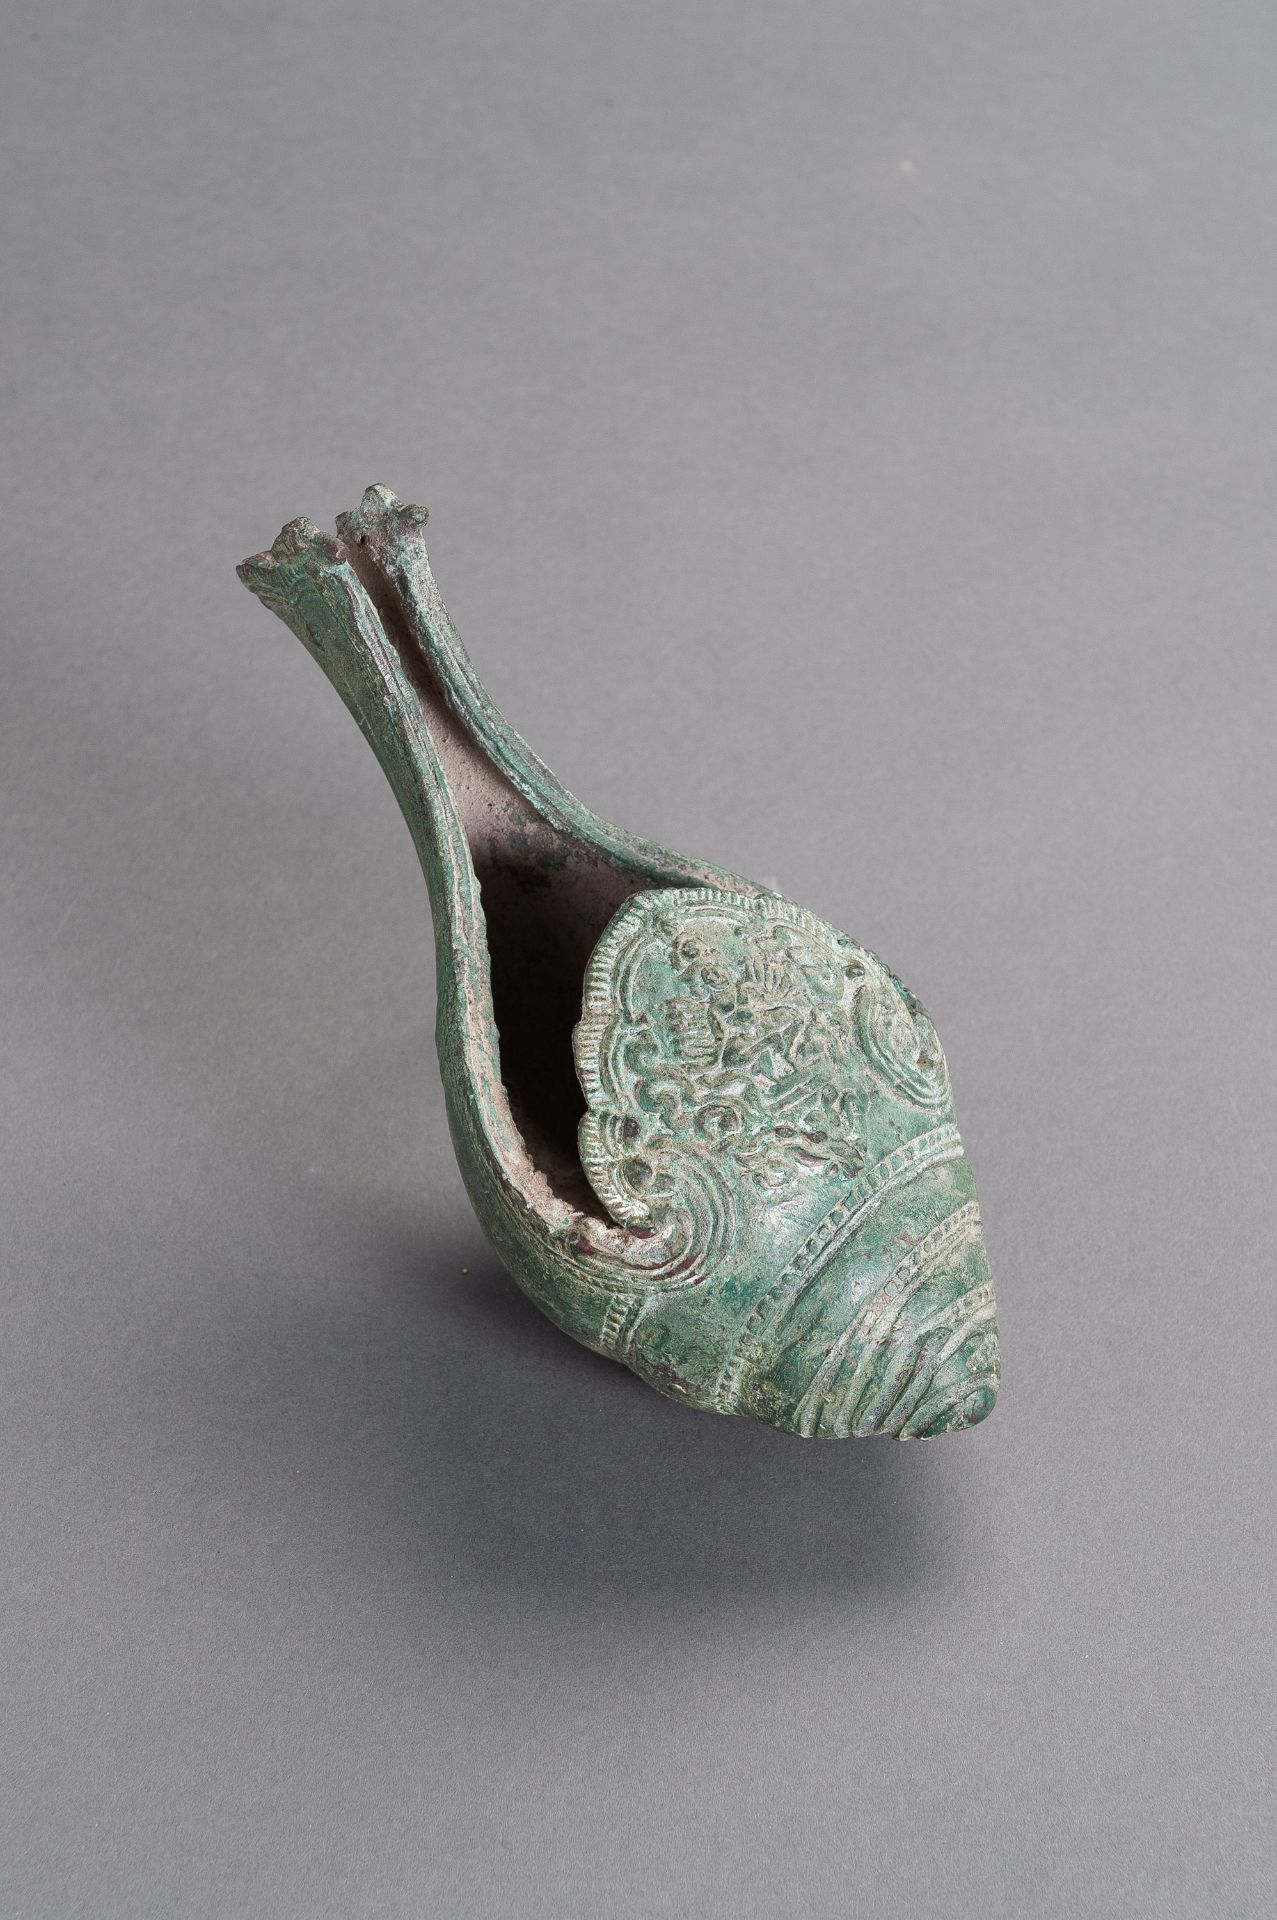 A BRONZE KHMER CONCH SHELL - Image 6 of 12